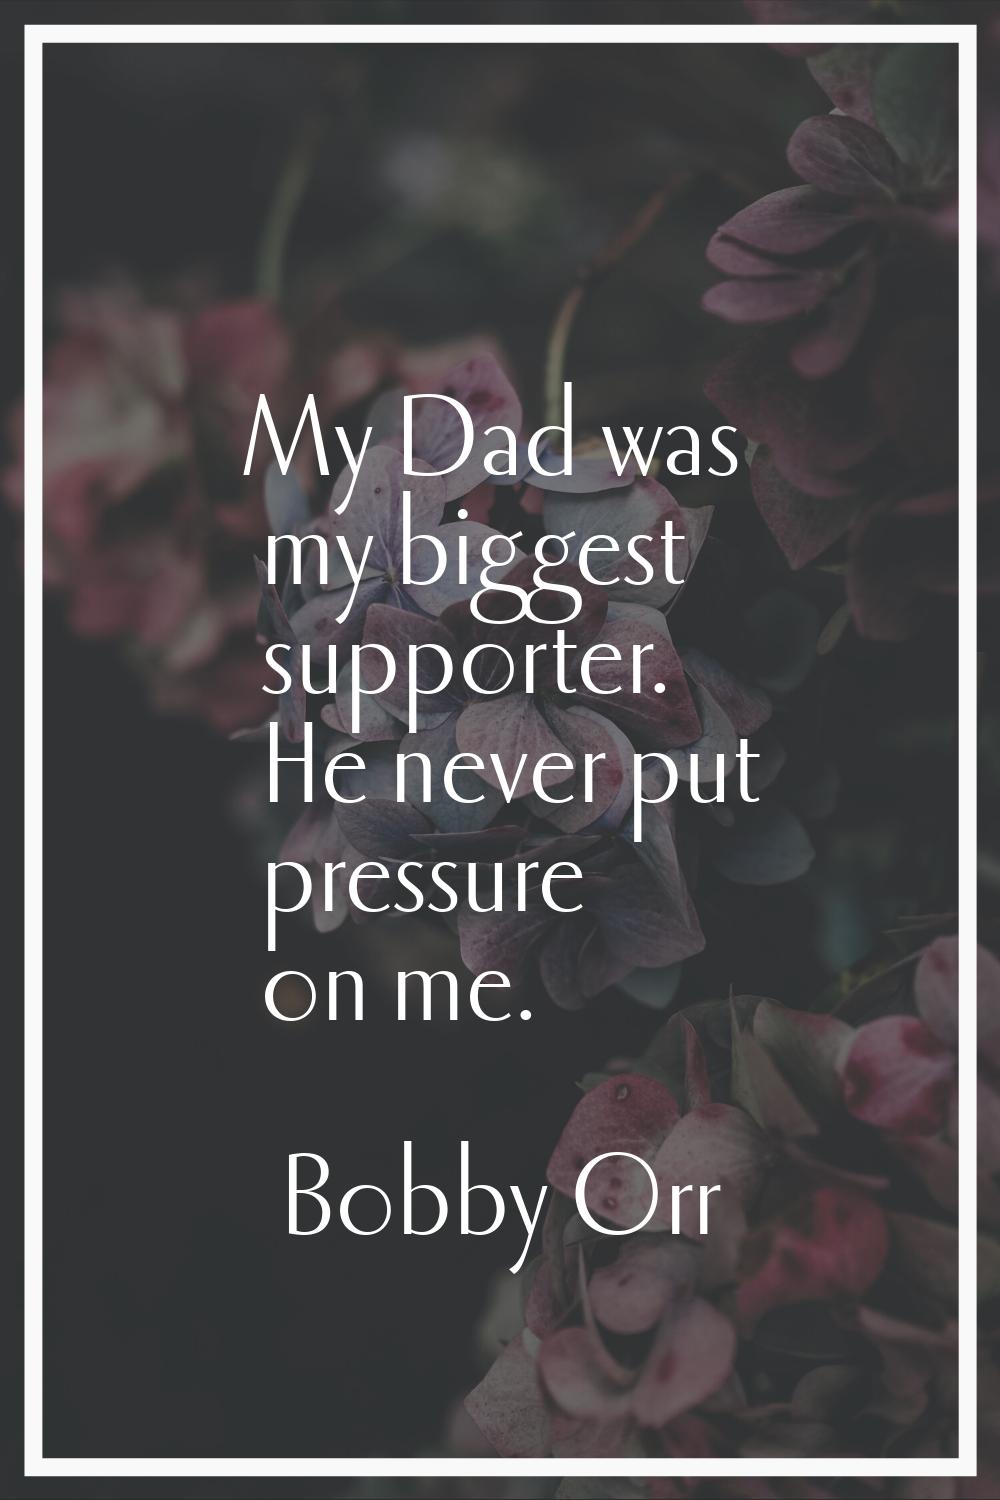 My Dad was my biggest supporter. He never put pressure on me.